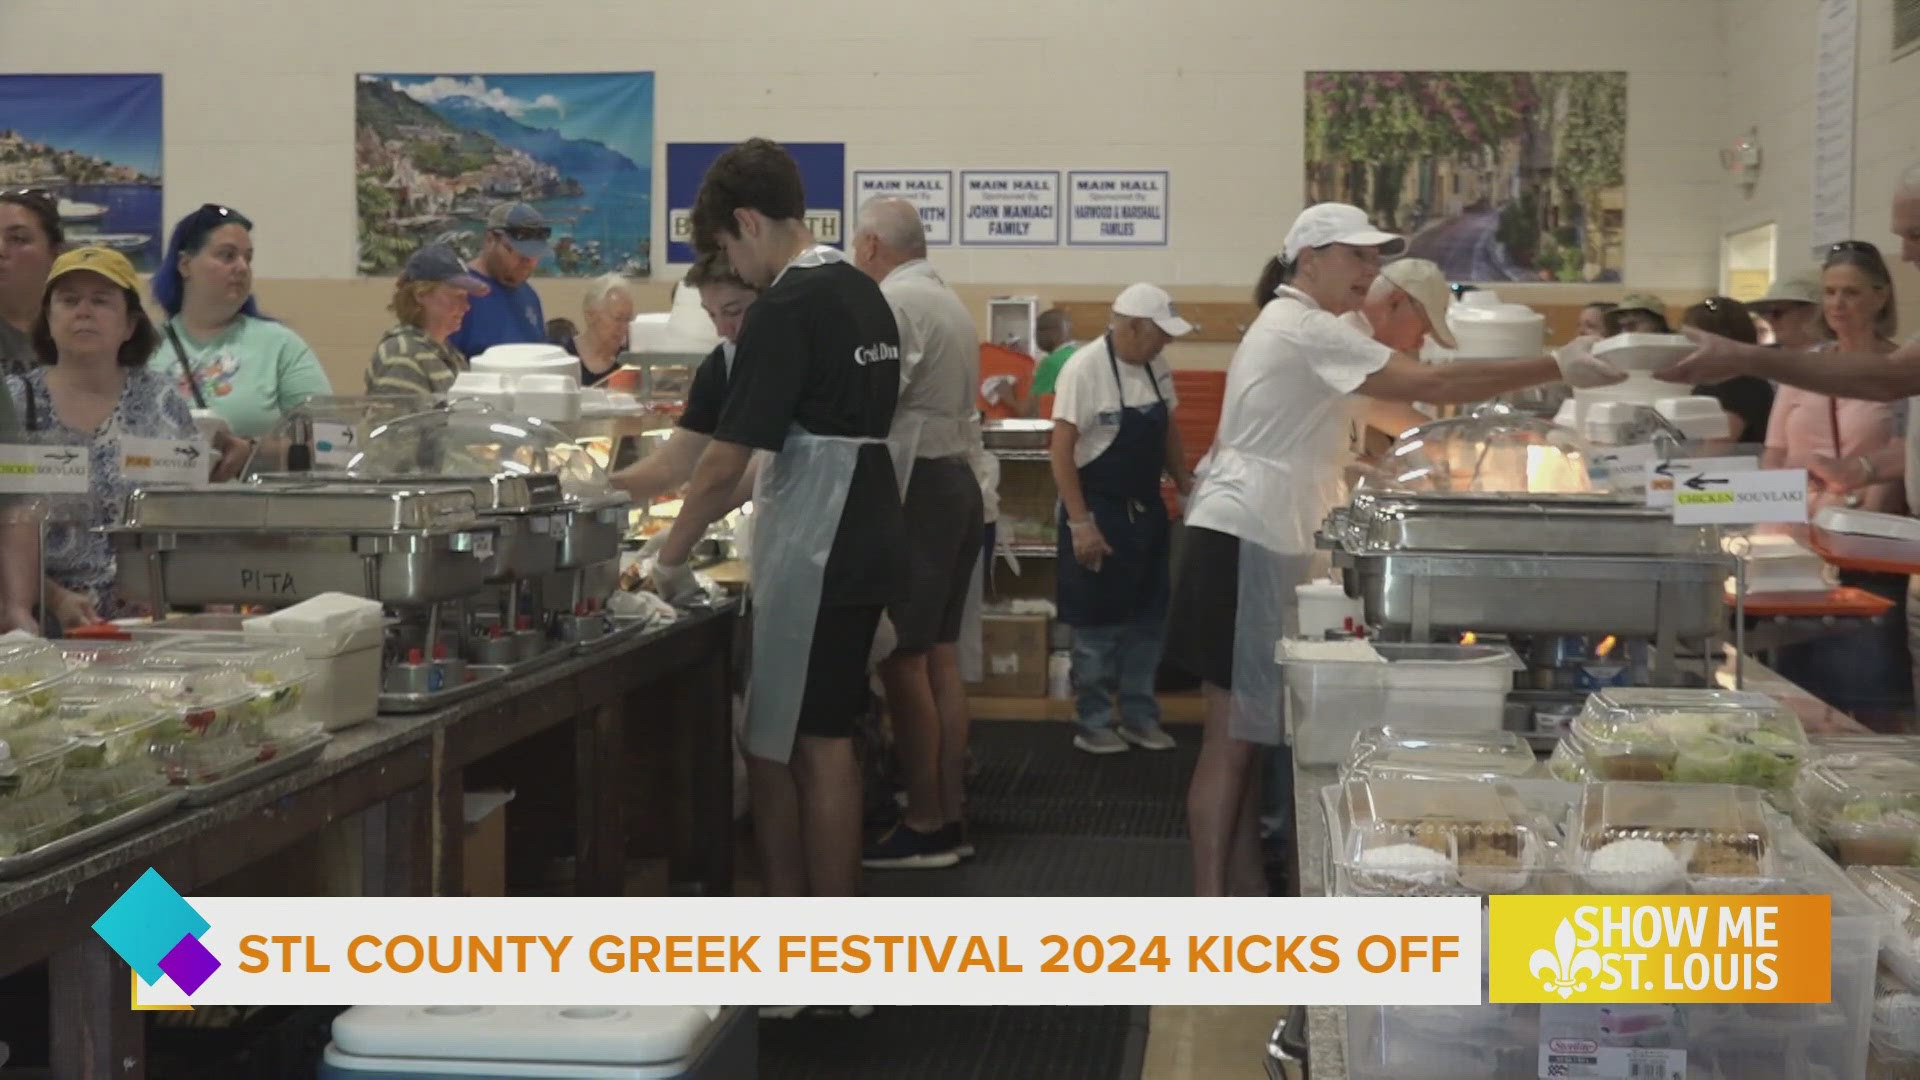 The St. Louis County Greek Festival returns to Town & Country with live music, traditional folk dancing, and Greek cuisine at Assumption Greek Orthodox Church.